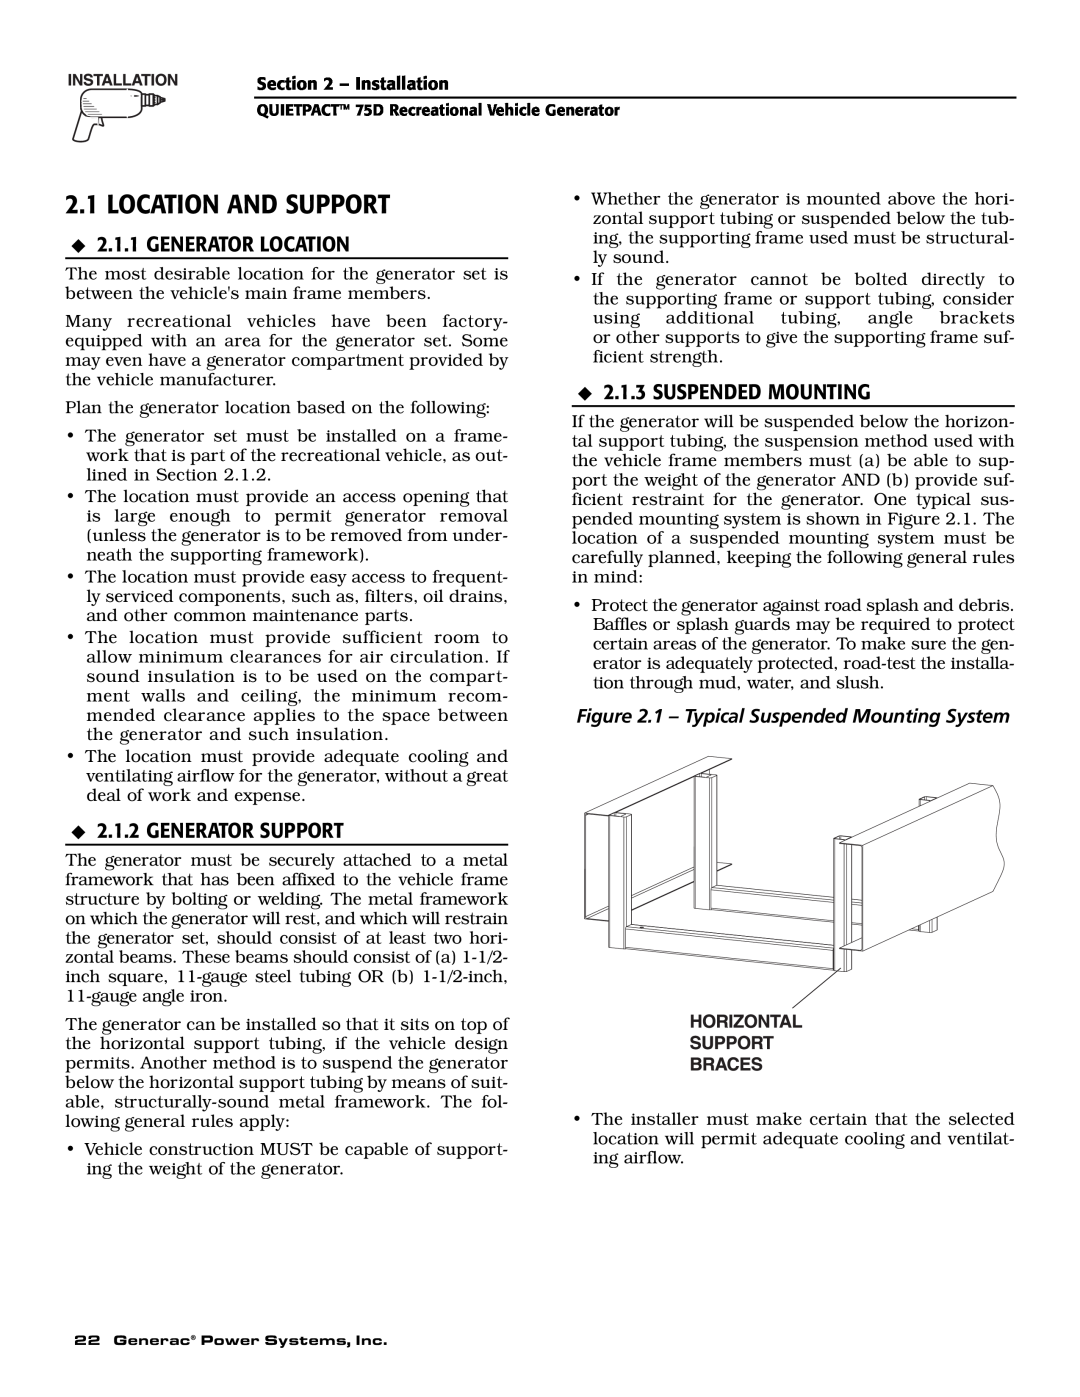 Guardian Technologies 004270-2 owner manual Location And Support, Generator Location, Generator Support, Suspended Mounting 